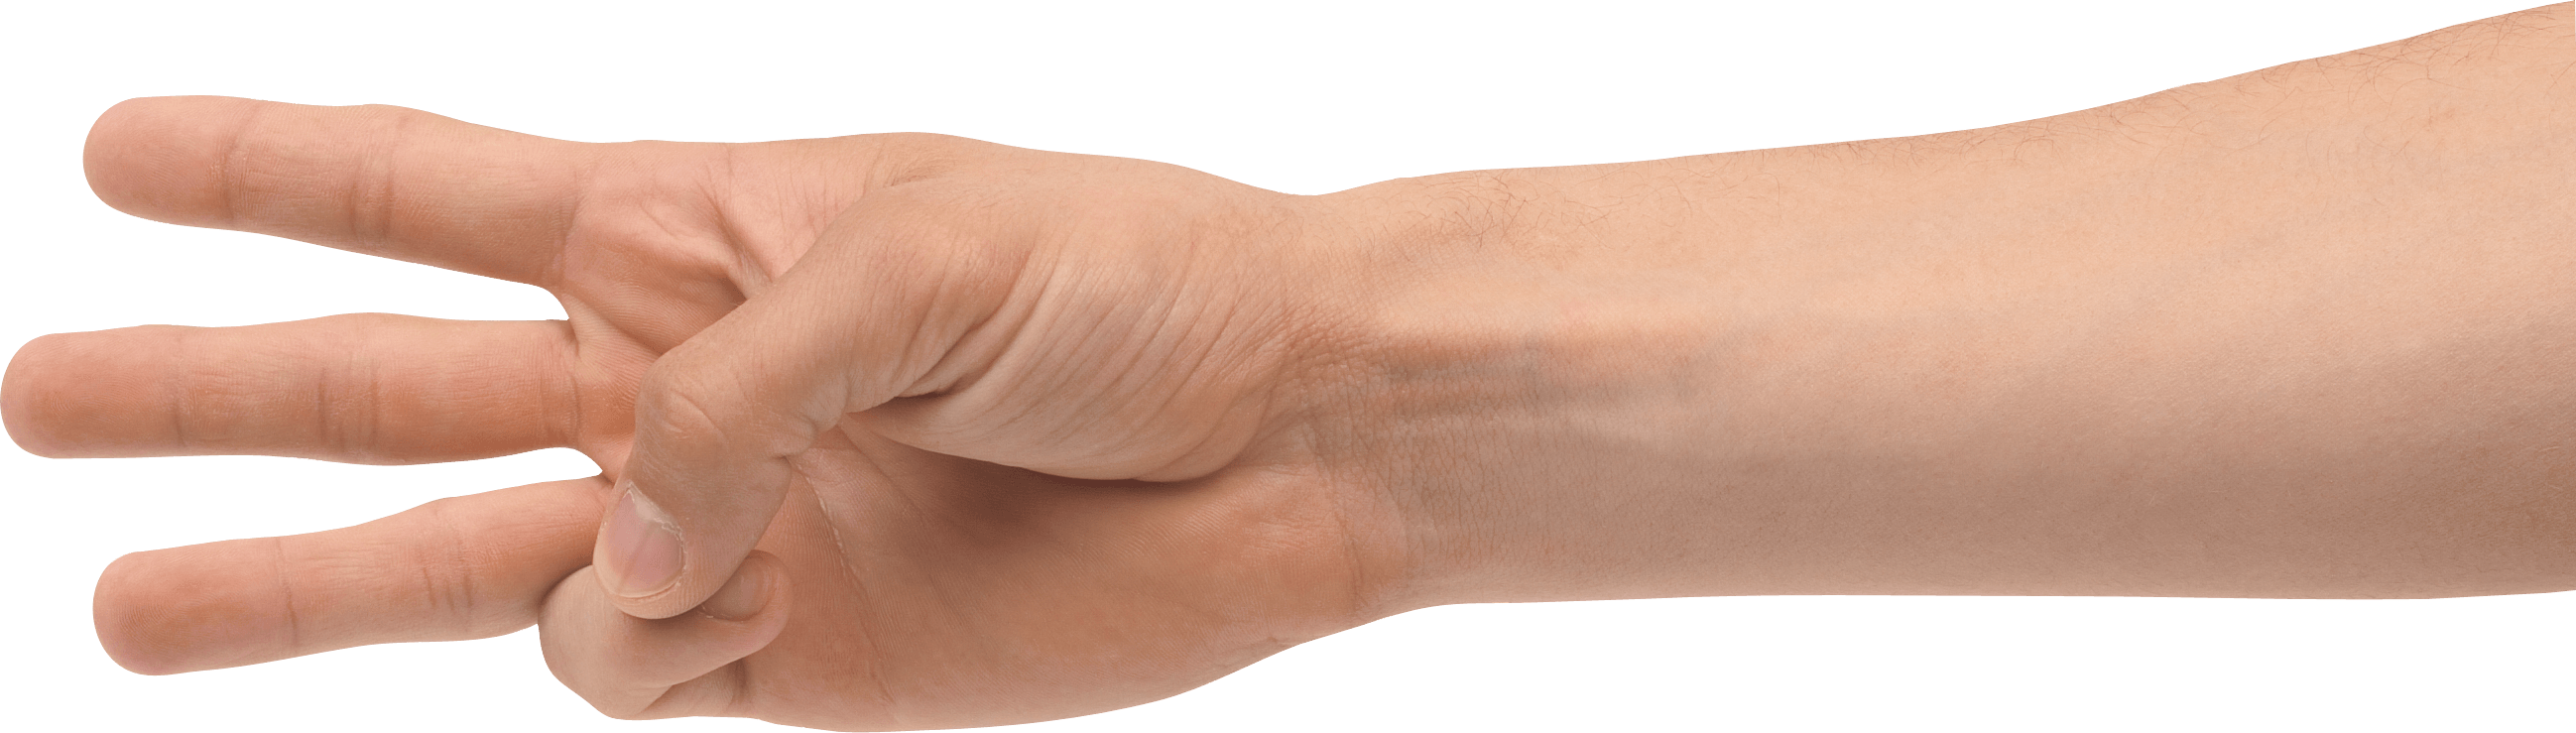 Three Finger Hand Hands Png Hand Image  PNG Image